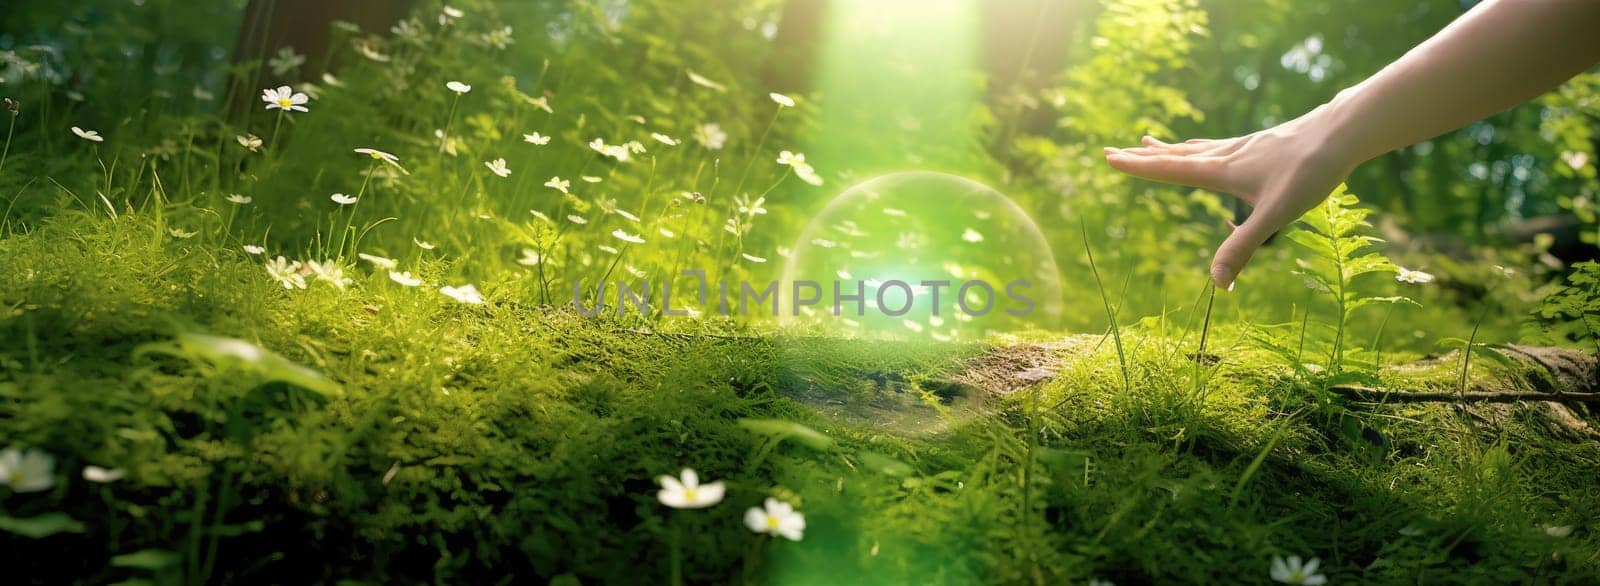 A hand reaches for the grass in a sunny bright forest by cherezoff